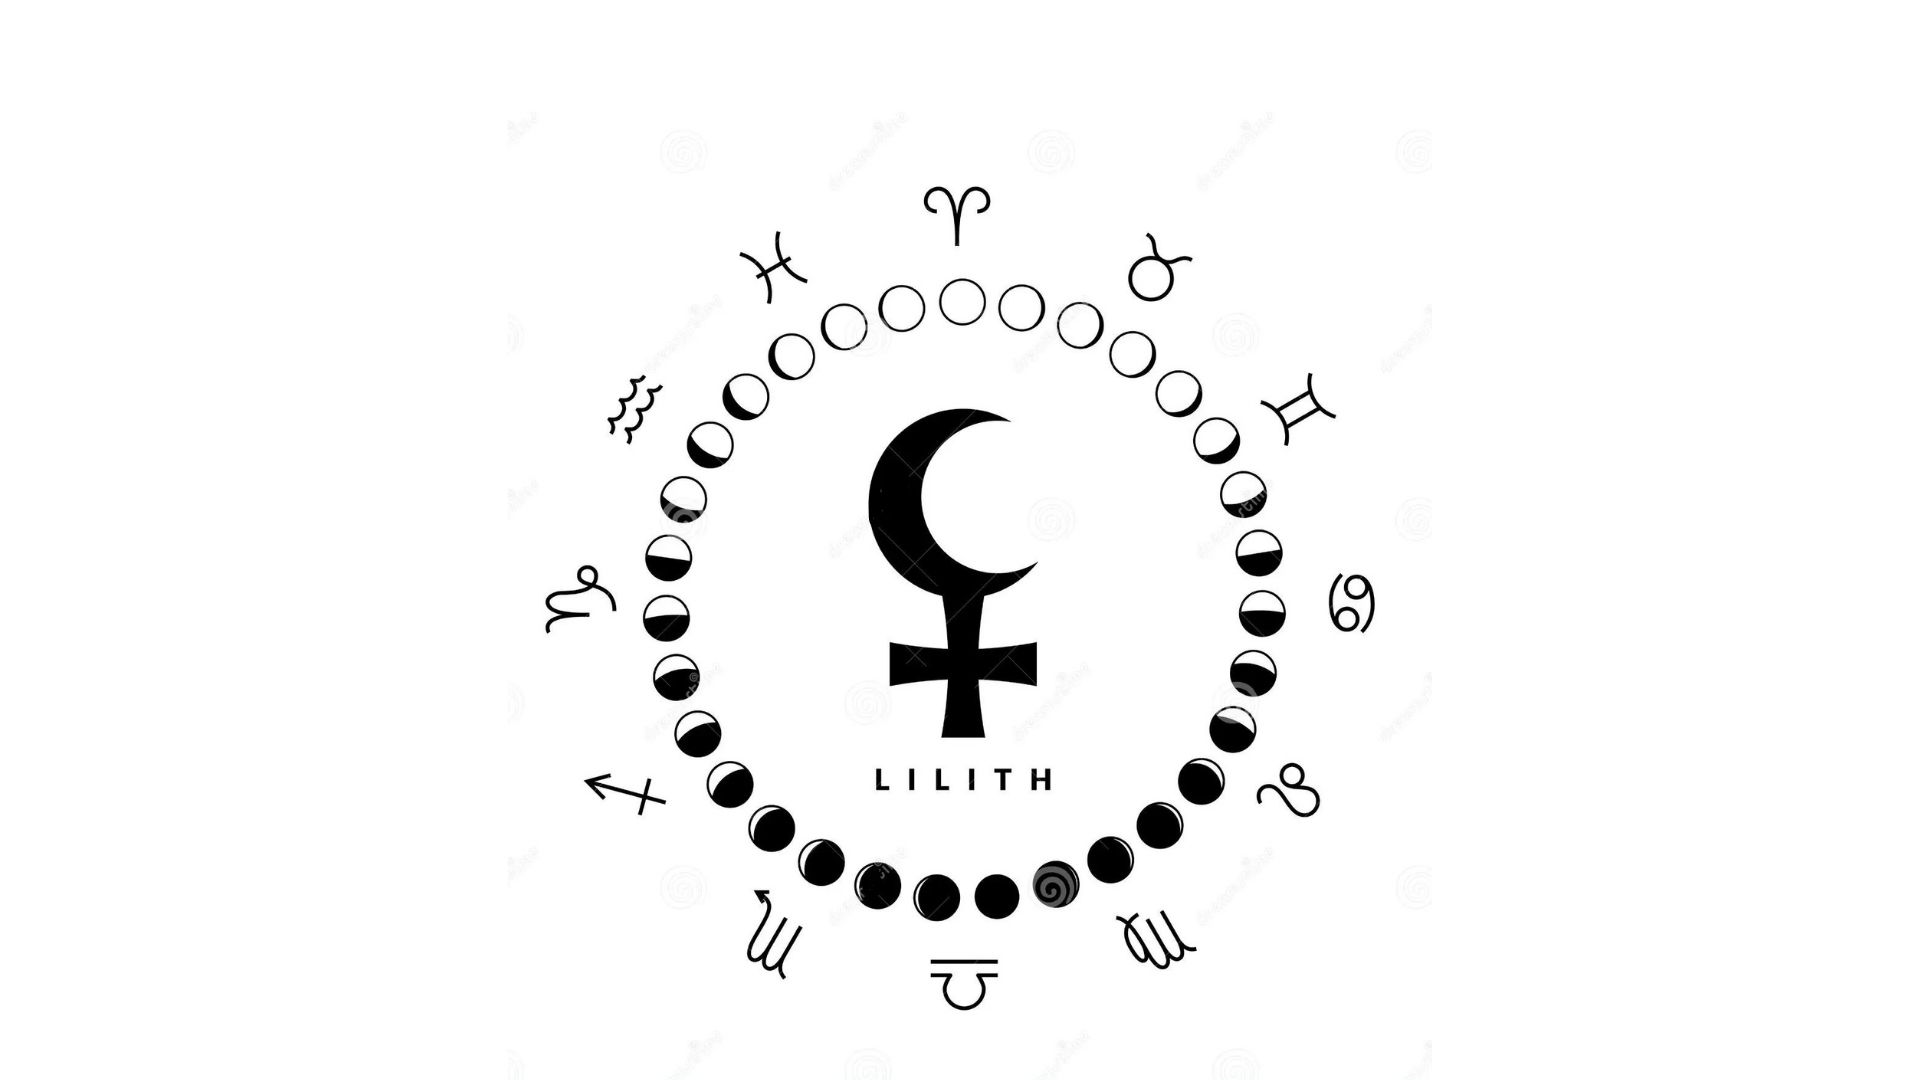 Lilith Symbol In the Middle of a Circle Of Zodiac Signs